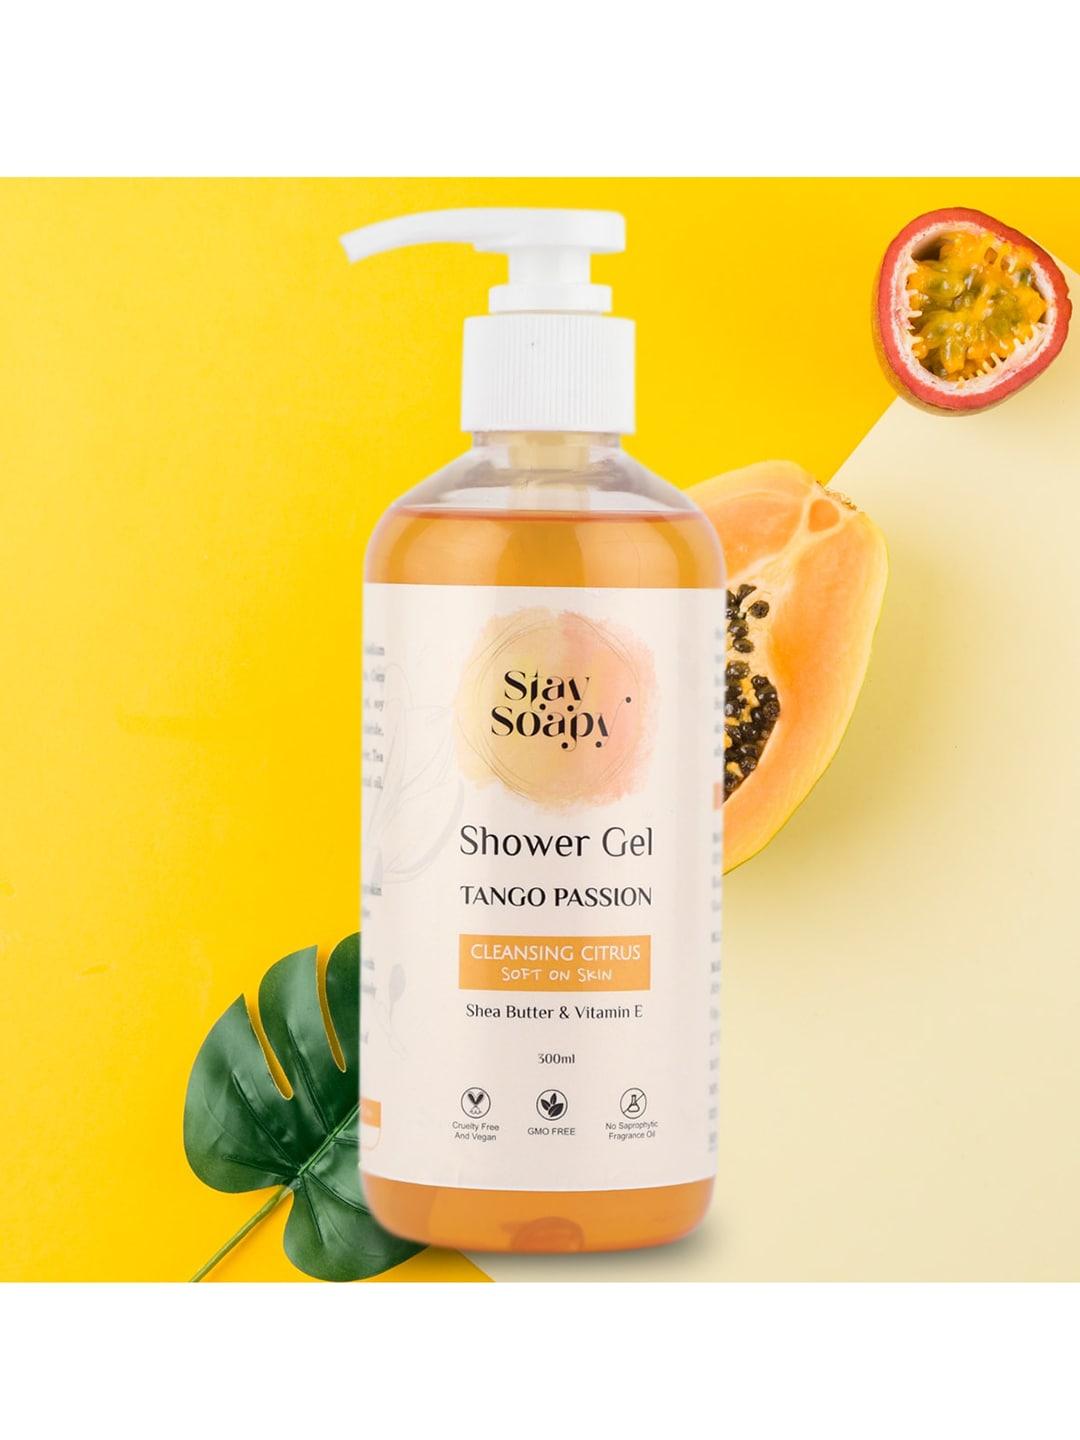 stay soapy cleansing citrus tango passion shower gel with shea butter & vitamin e - 300 ml